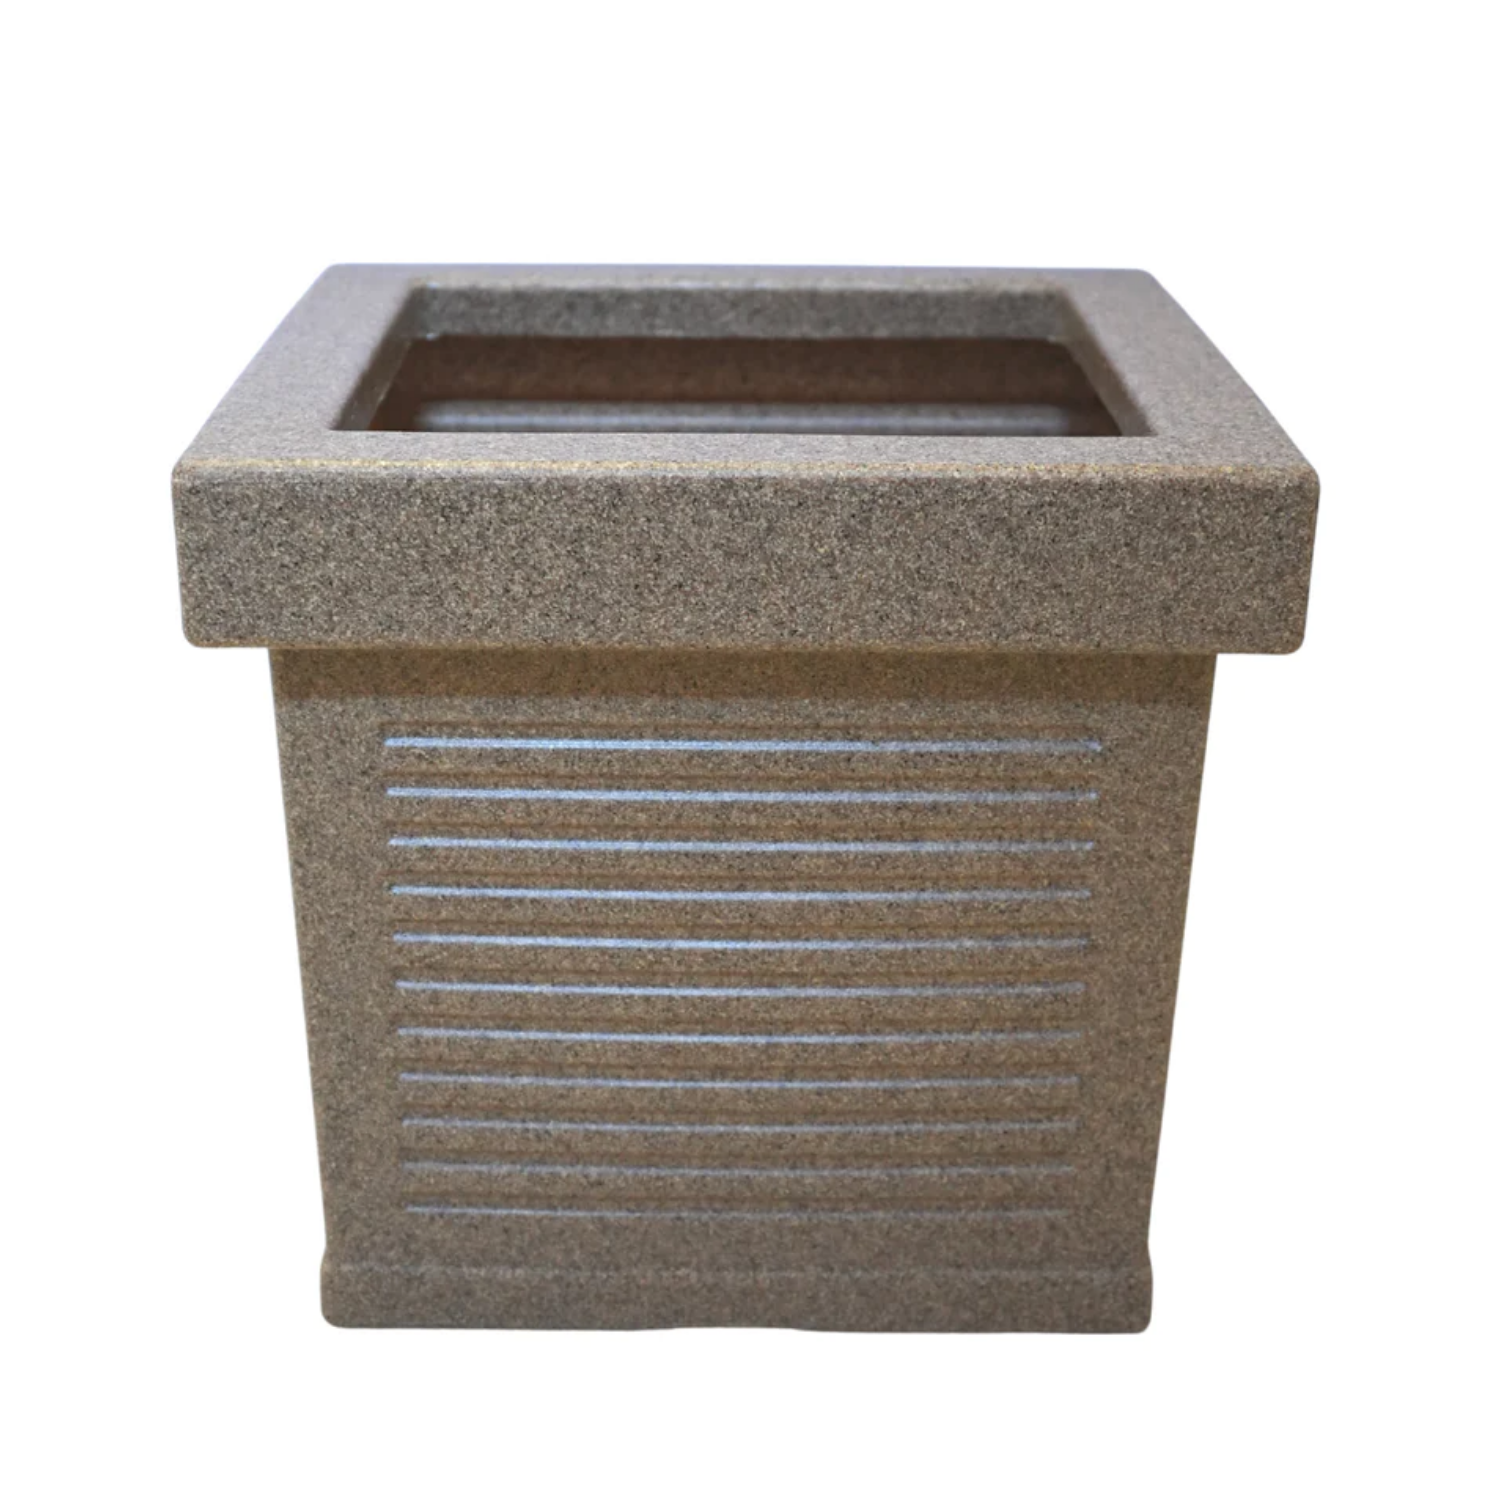 Cubo Rotomolded Square Plastic Pot For Home & Garden (Sand Stone Finish, Pack Of 1)